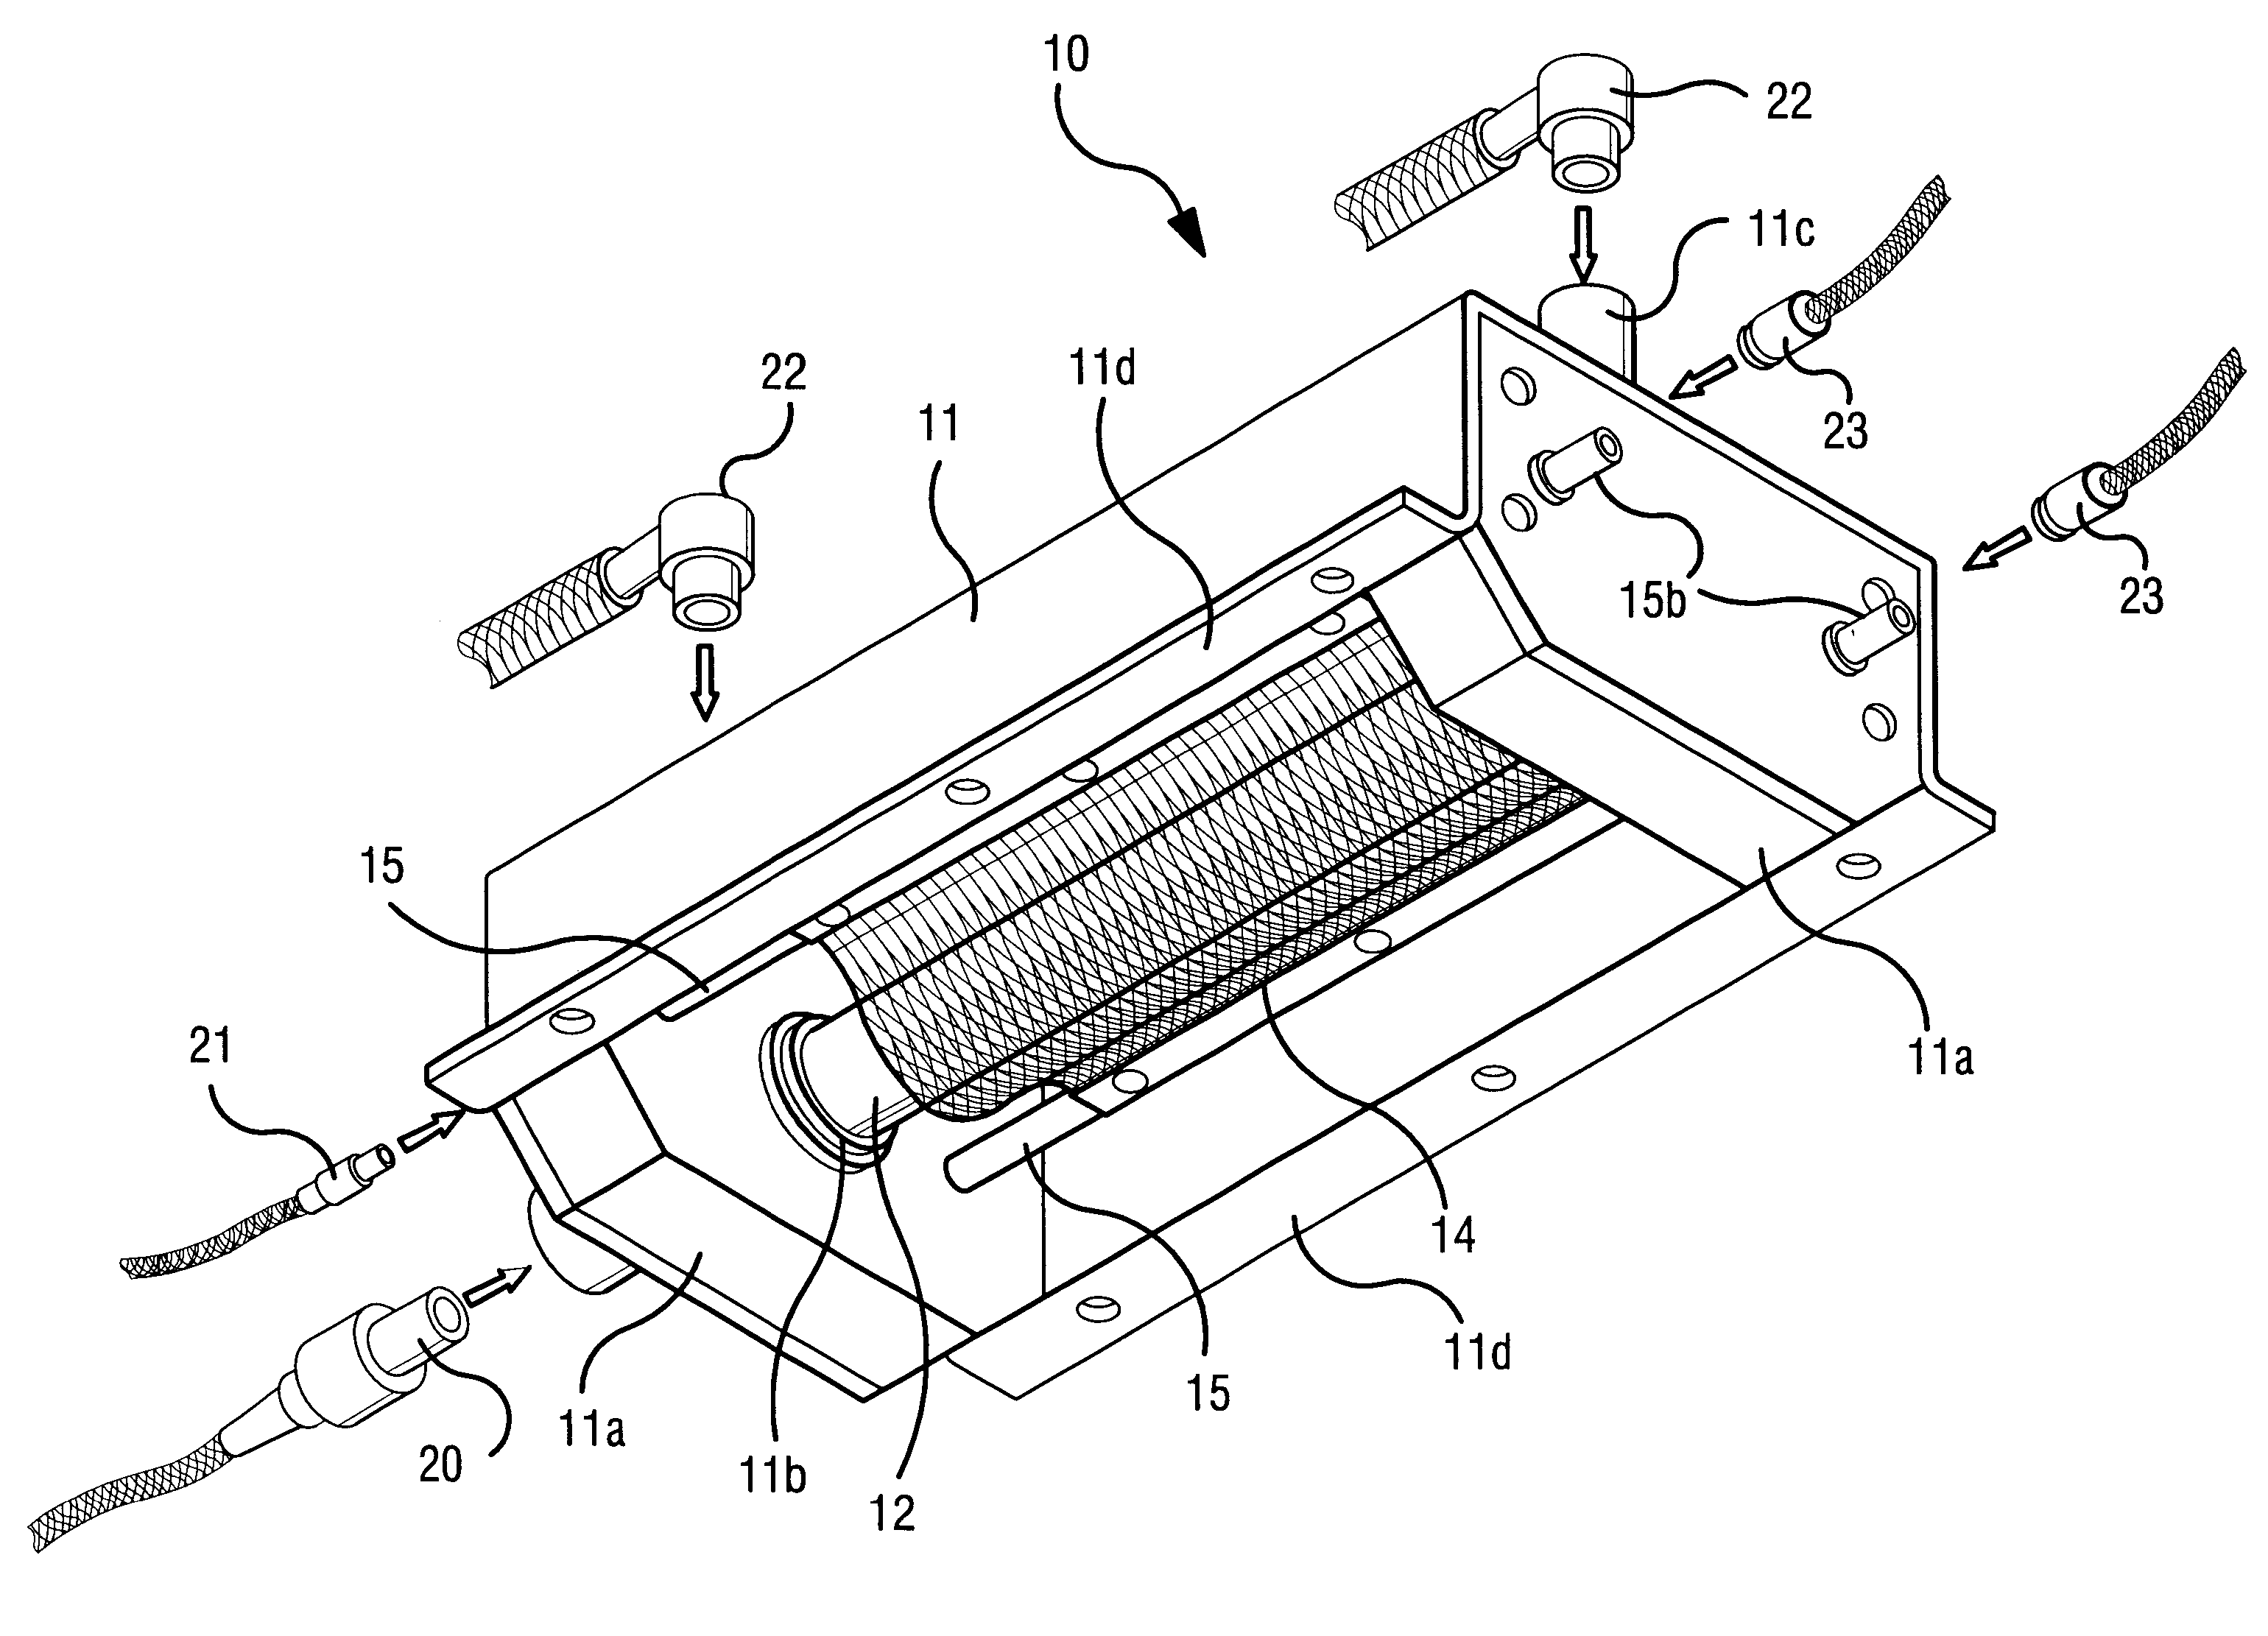 Dielectric barrier excimer lamp and ultraviolet light beam irradiating apparatus with the lamp